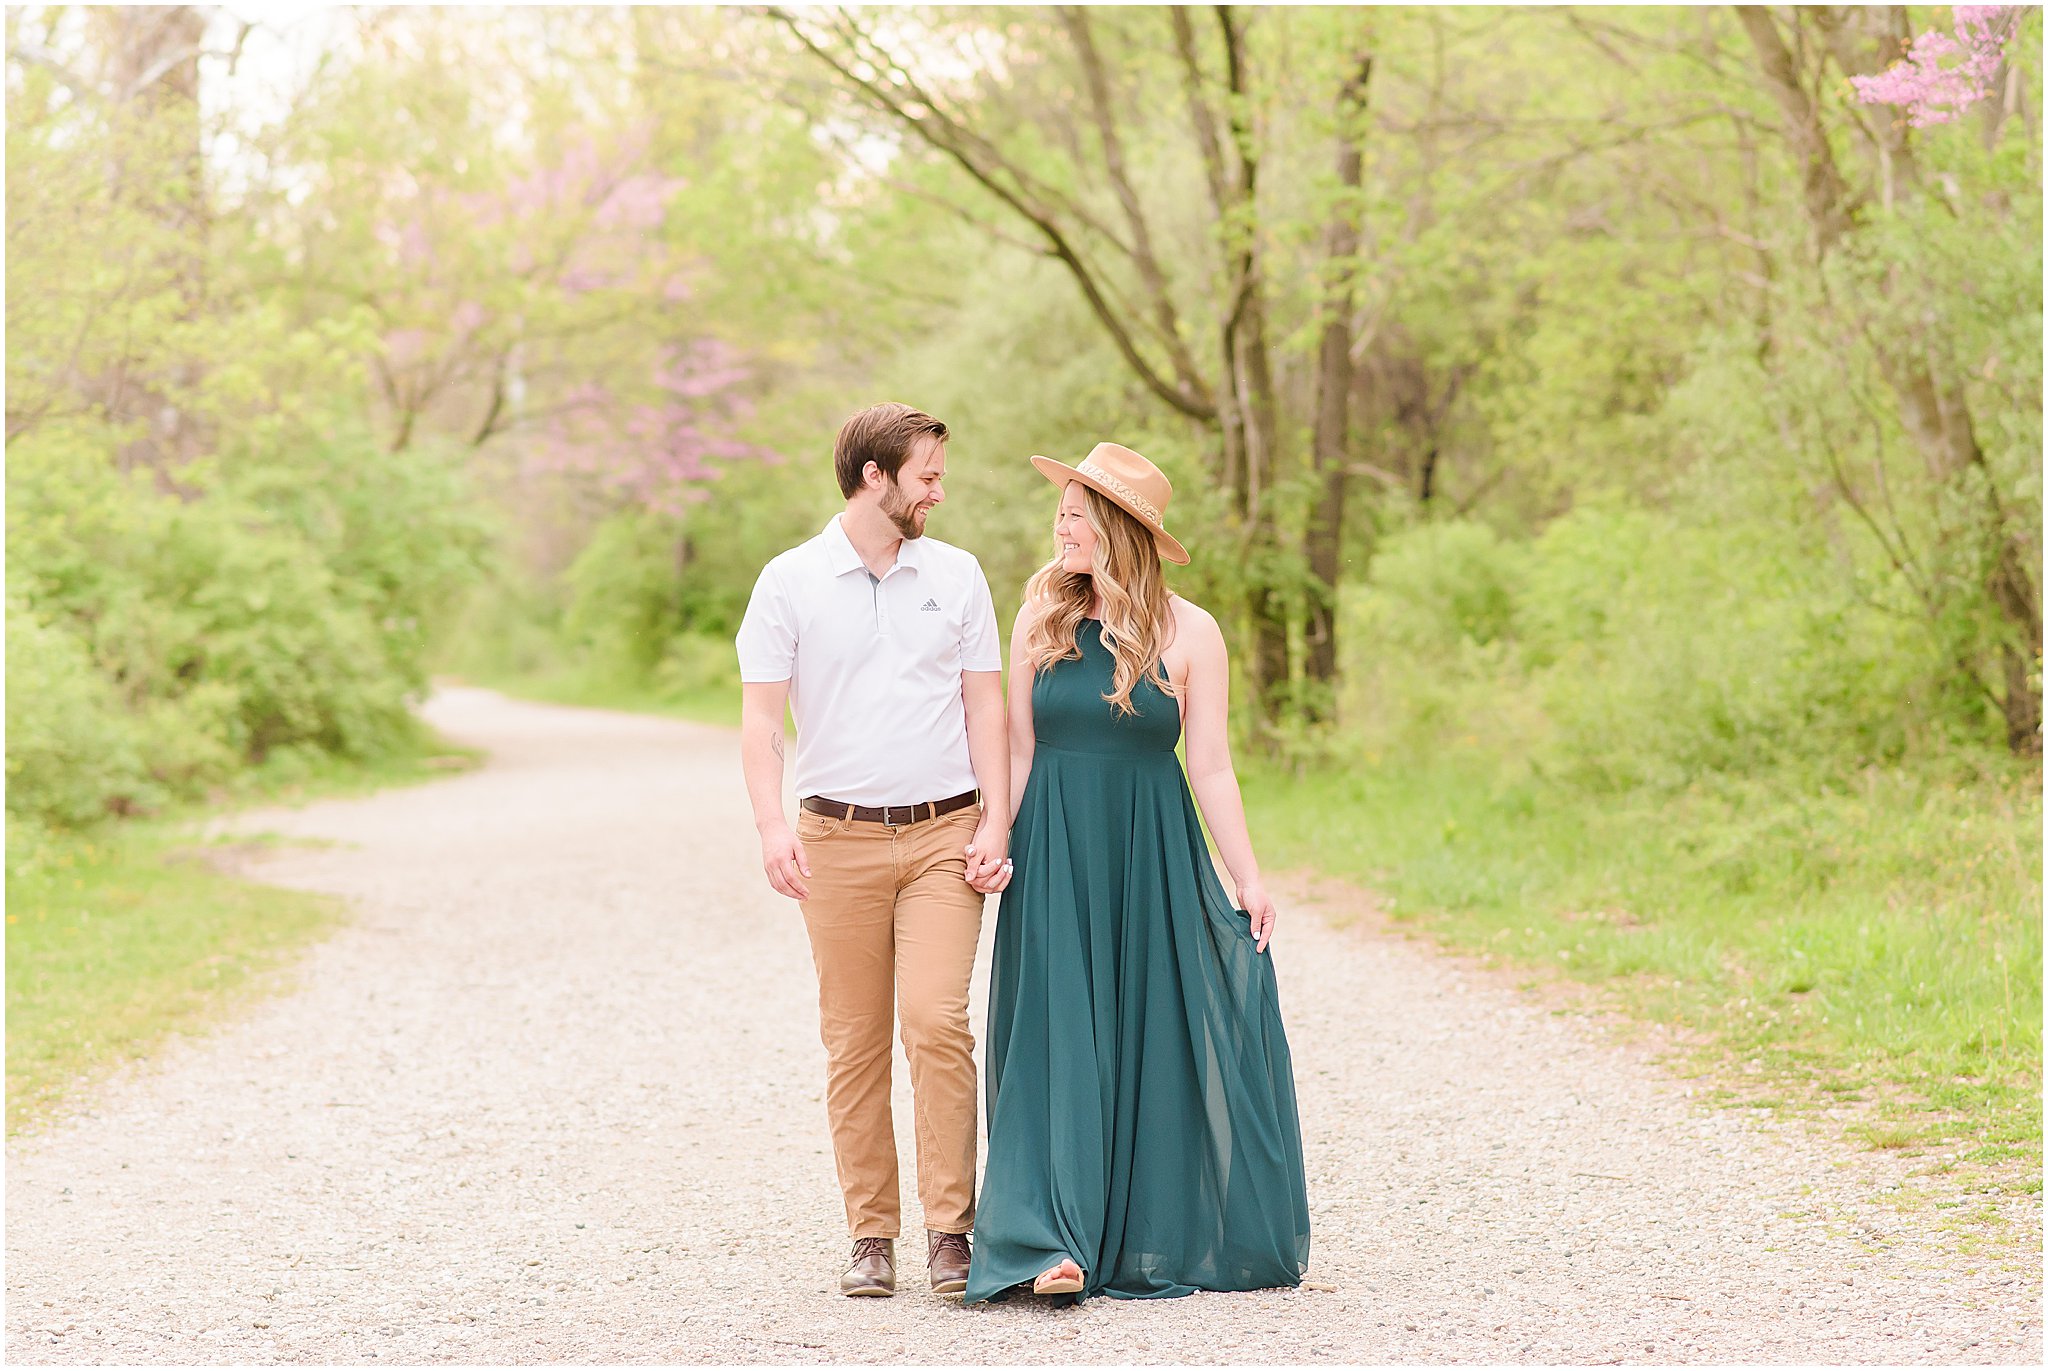 Couple strolling down path holding hands during Eagle Creek Park Engagement Session